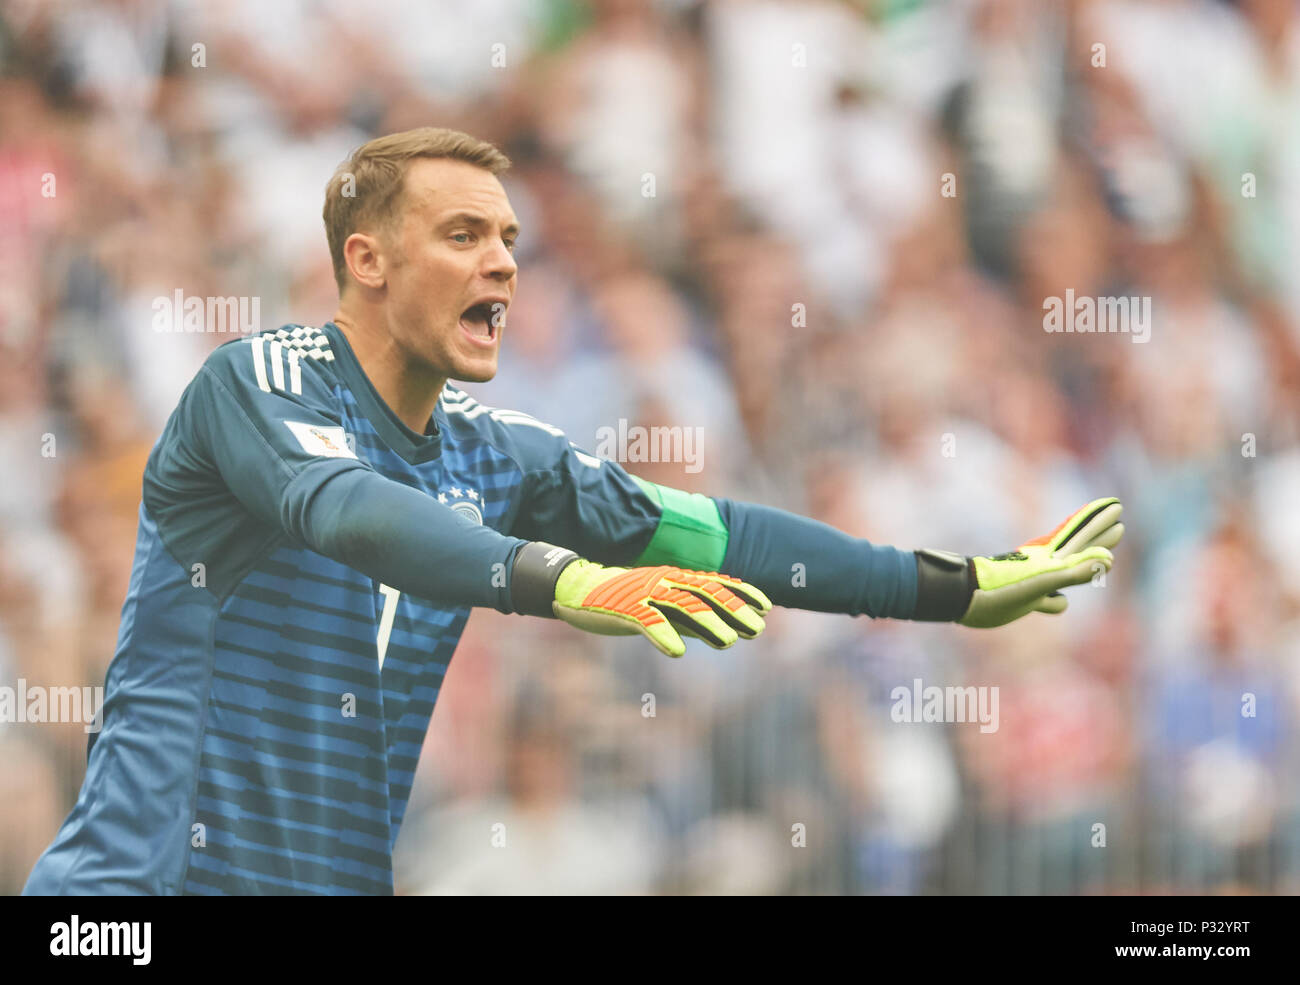 Moscow, Russia, 17 June 2018. Germany - Mexico, Soccer, Moscow, June 17, 2018 Manuel NEUER, DFB 1 Torwart, Emotions, feelings, reaction, anger, furious, scream, rage, action, aggressive, aggression,  GERMANY - MEXICO FIFA WORLD CUP 2018 RUSSIA, Group F, Season 2018/2019,  June 17, 2018 L u z h n i k i Stadium in Moscow, Russia.  © Peter Schatz / Alamy Live News Stock Photo